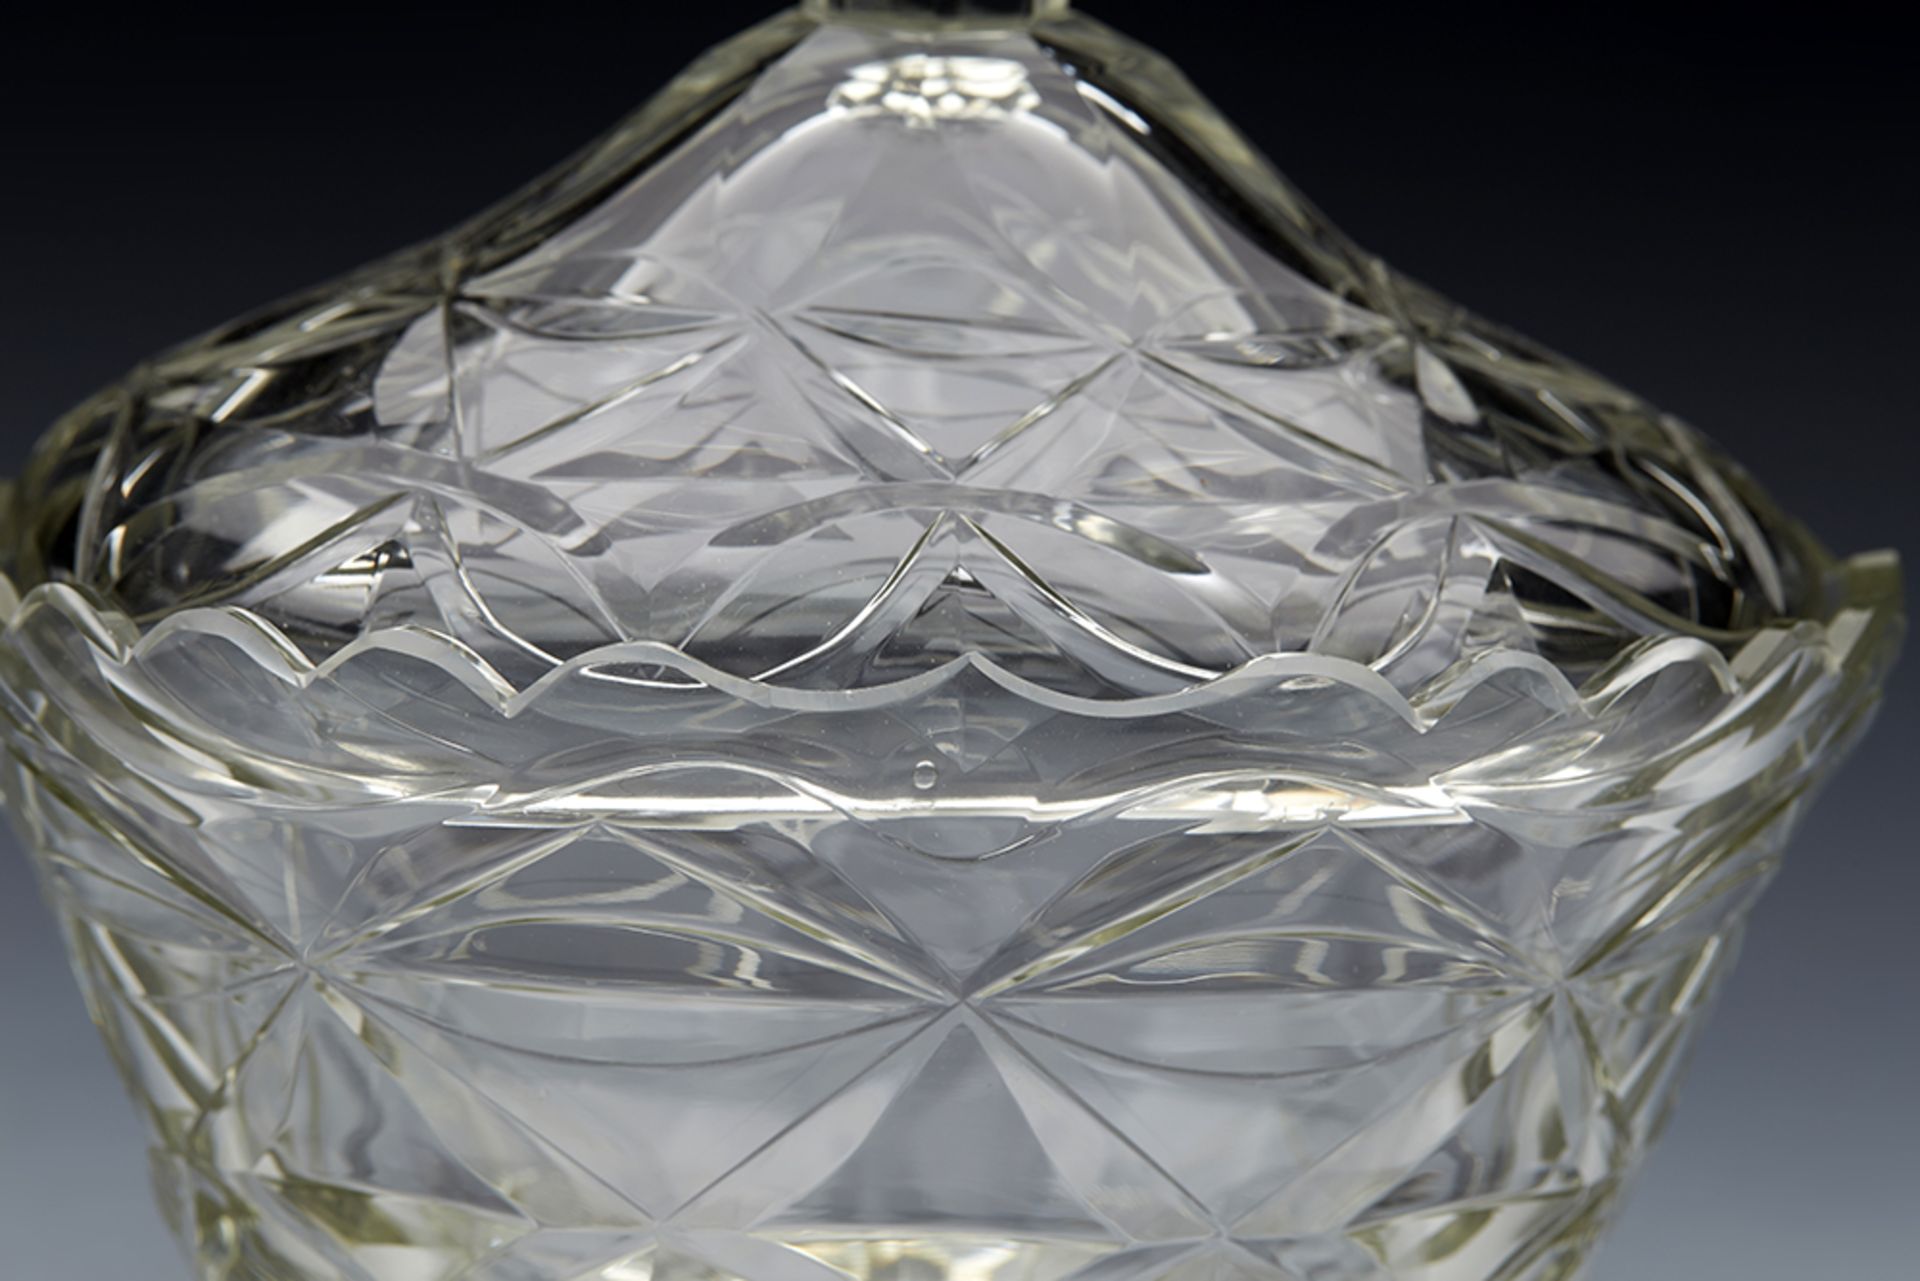 ANTIQUE CUT GLASS LIDDED BUTTER DISH AND STAND EARLY 19TH C.   DIMENSIONS   Height 19cm, Length 25, - Image 11 of 15